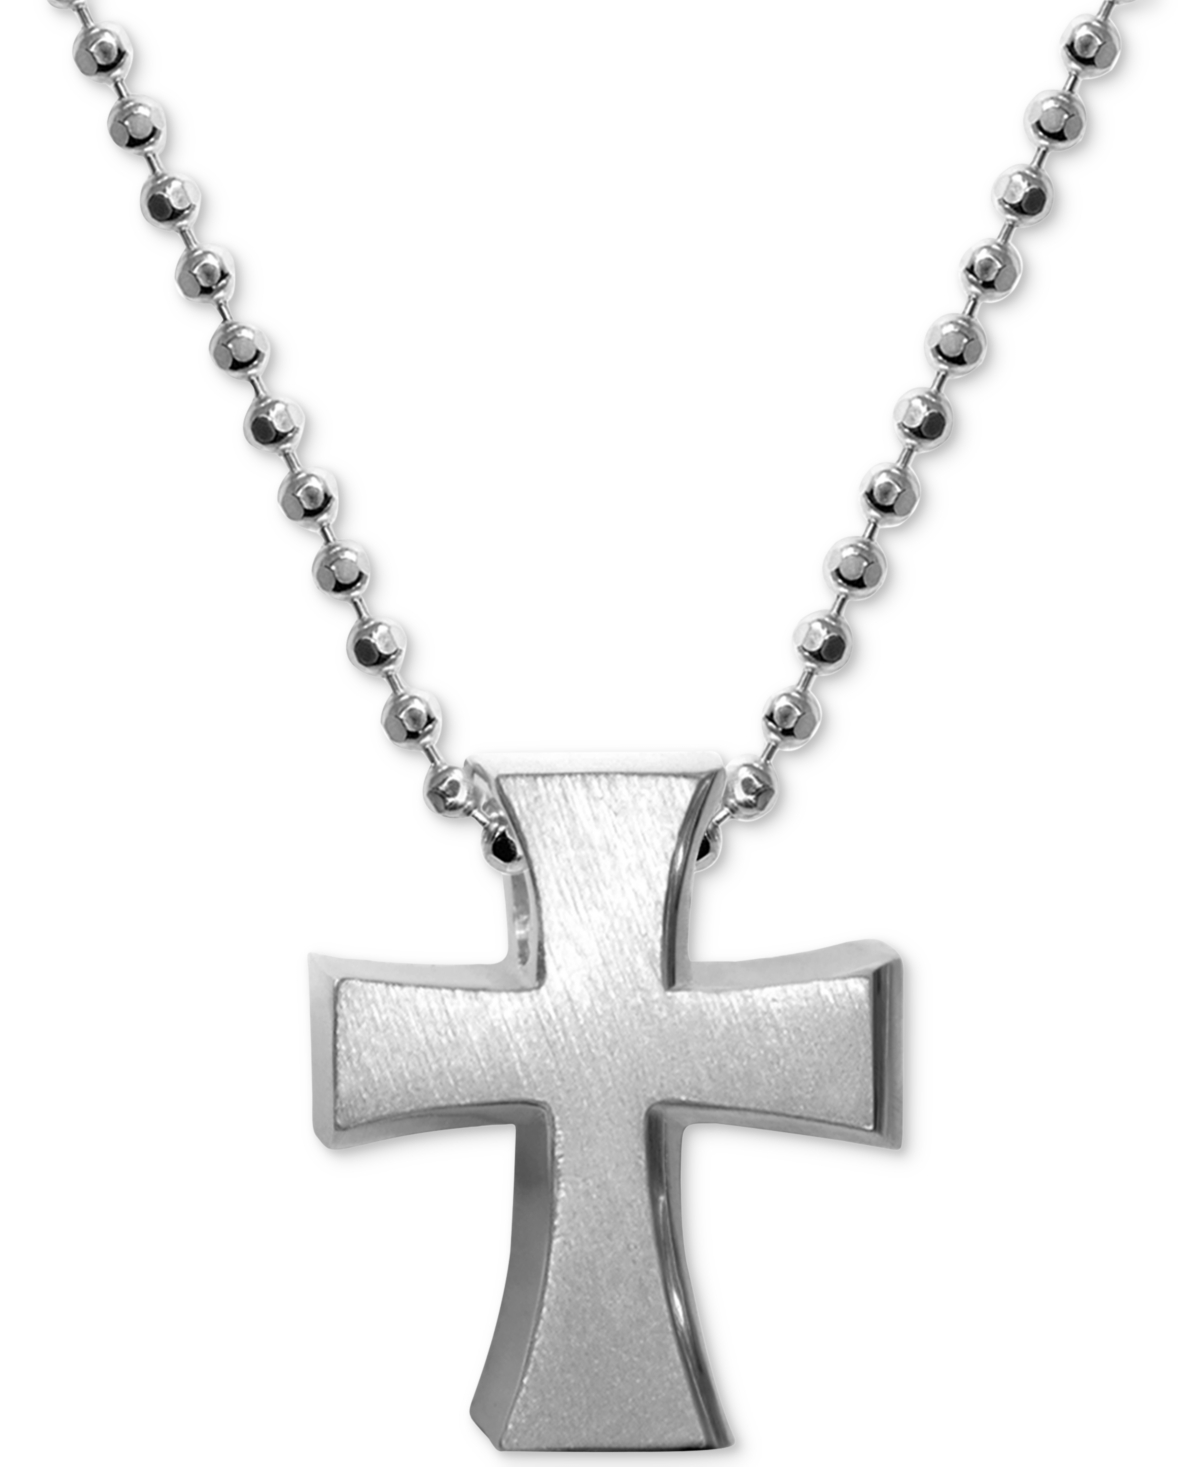 Cross Pendant Necklace in Sterling Silver - Silver